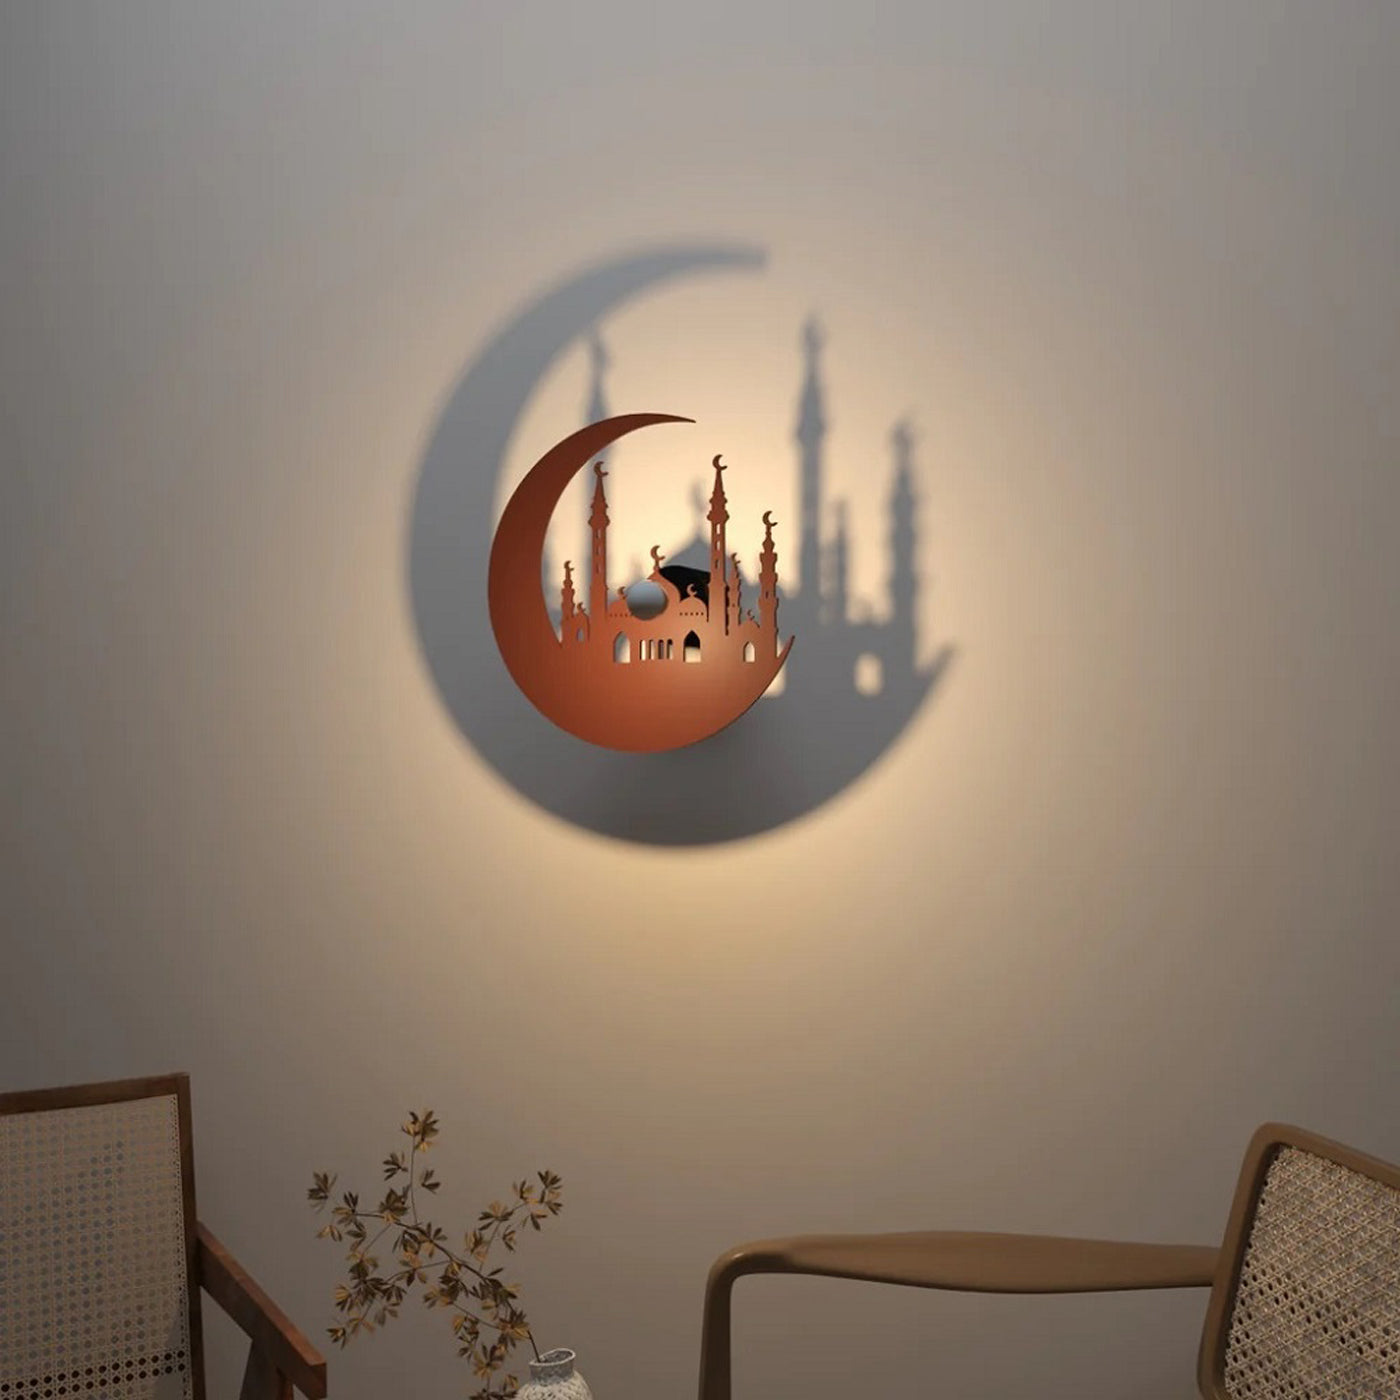 Islamic design Wall lamp for Home / office wall decor